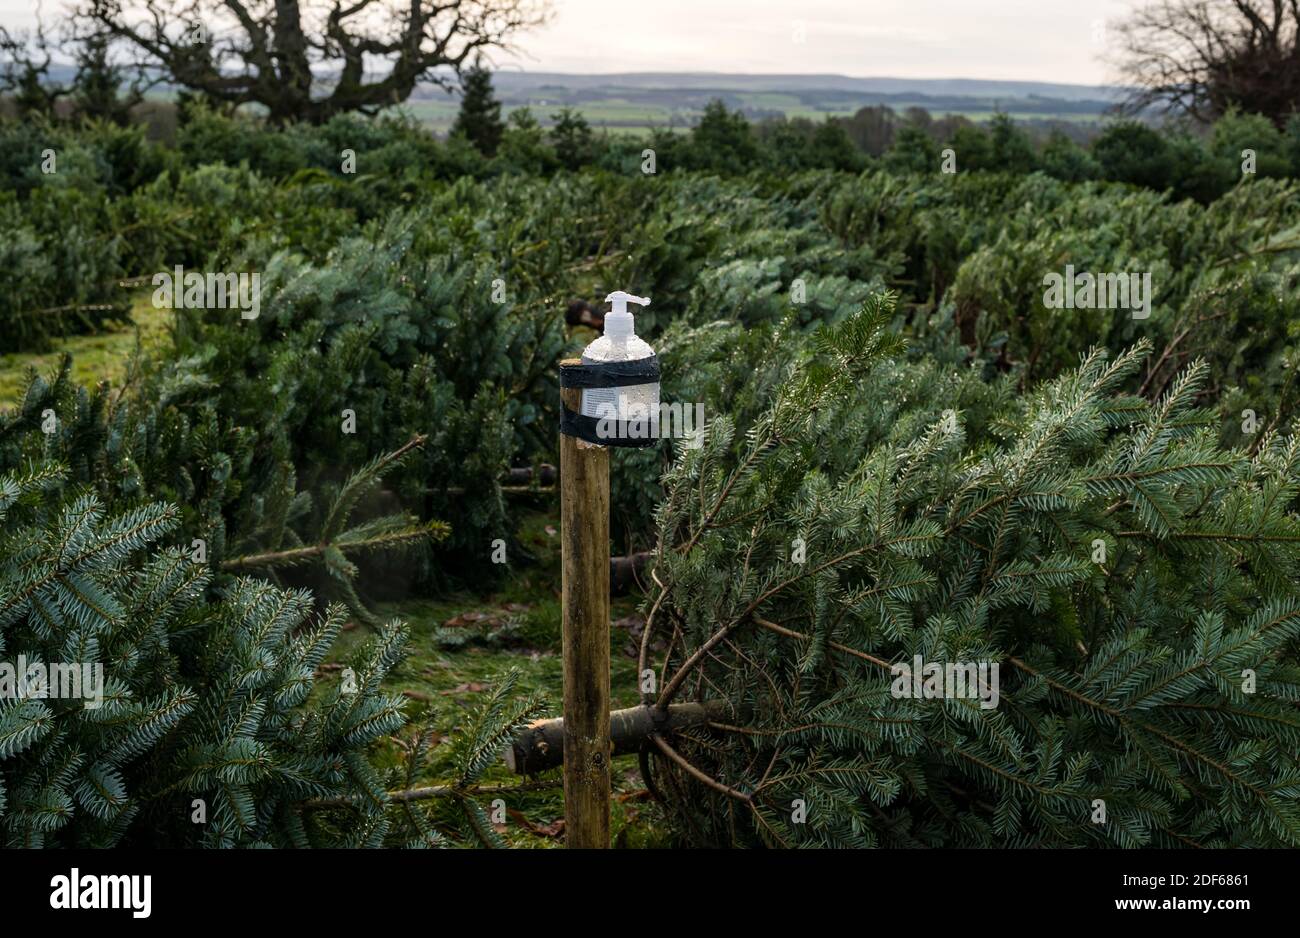 East Lothian, Scotland, United Kingdom, 3rd December 2020. Beanston Christmas trees: a family run business at Beanston farm for the last 30 years grow 6 varieties of fir trees in their walled garden for customers who return every year with social distancing and hygiene measures in place Stock Photo